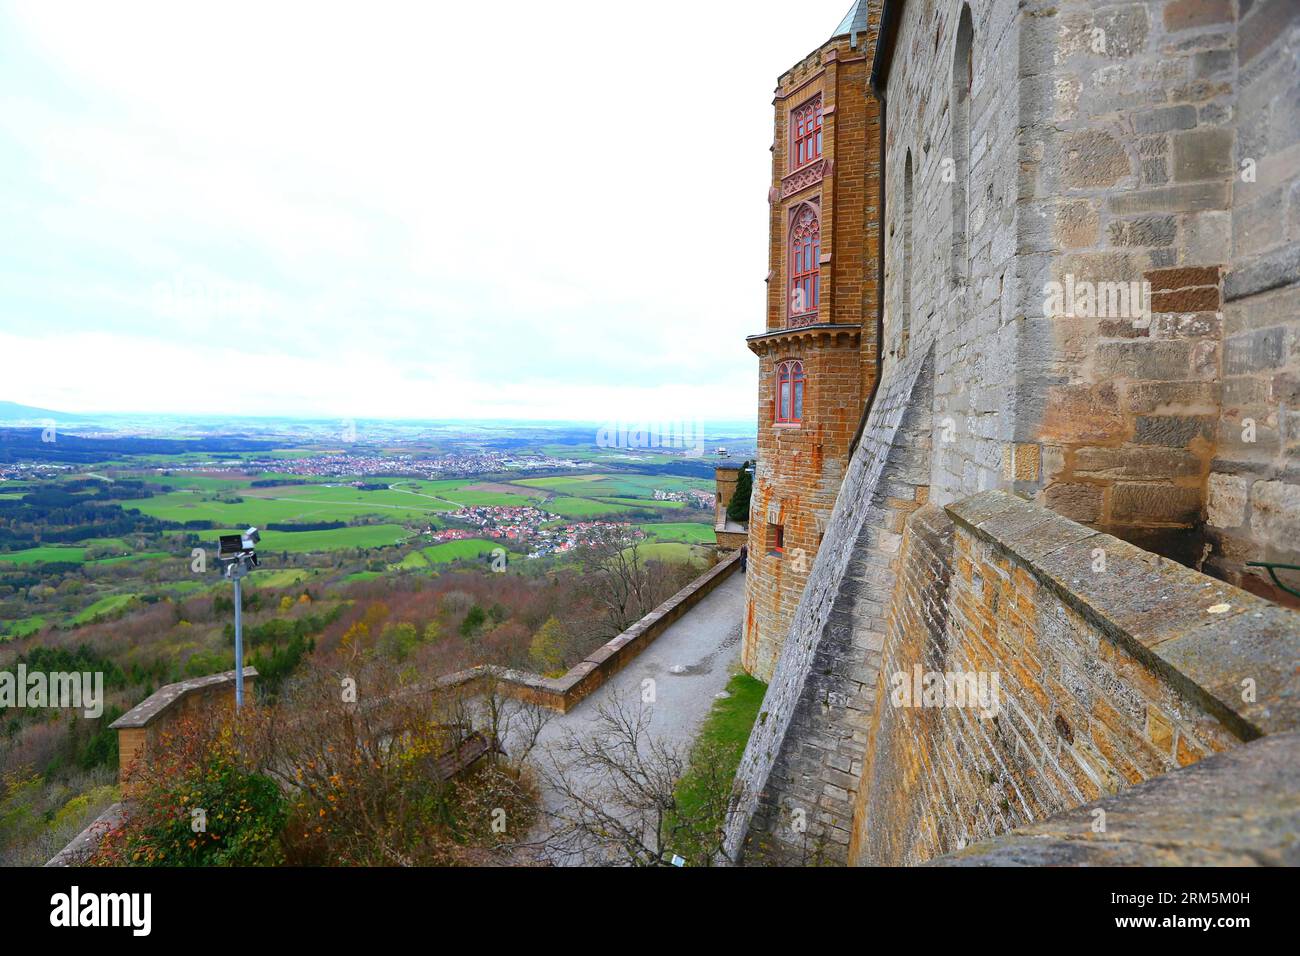 Bildnummer: 60684828  Datum: 02.11.2013  Copyright: imago/Xinhua Photo taken on Nov. 2, 2013 shows a part of the Burg Hohenzollern in Hechingen, Germany. Burg Hohenzollern is a castle considered to be the ancestral seat of the Hohenzollern family, which emerged in the Middle Ages and eventually became German Emperors. The castle was first constructed in the early 11th century and completely destroyed in 1423. The current version of the castle was rebuilt in mid-19th century. The castle becomes a popular tourist destination today as it is still privately owned by the descendants of the Hohenzol Stock Photo